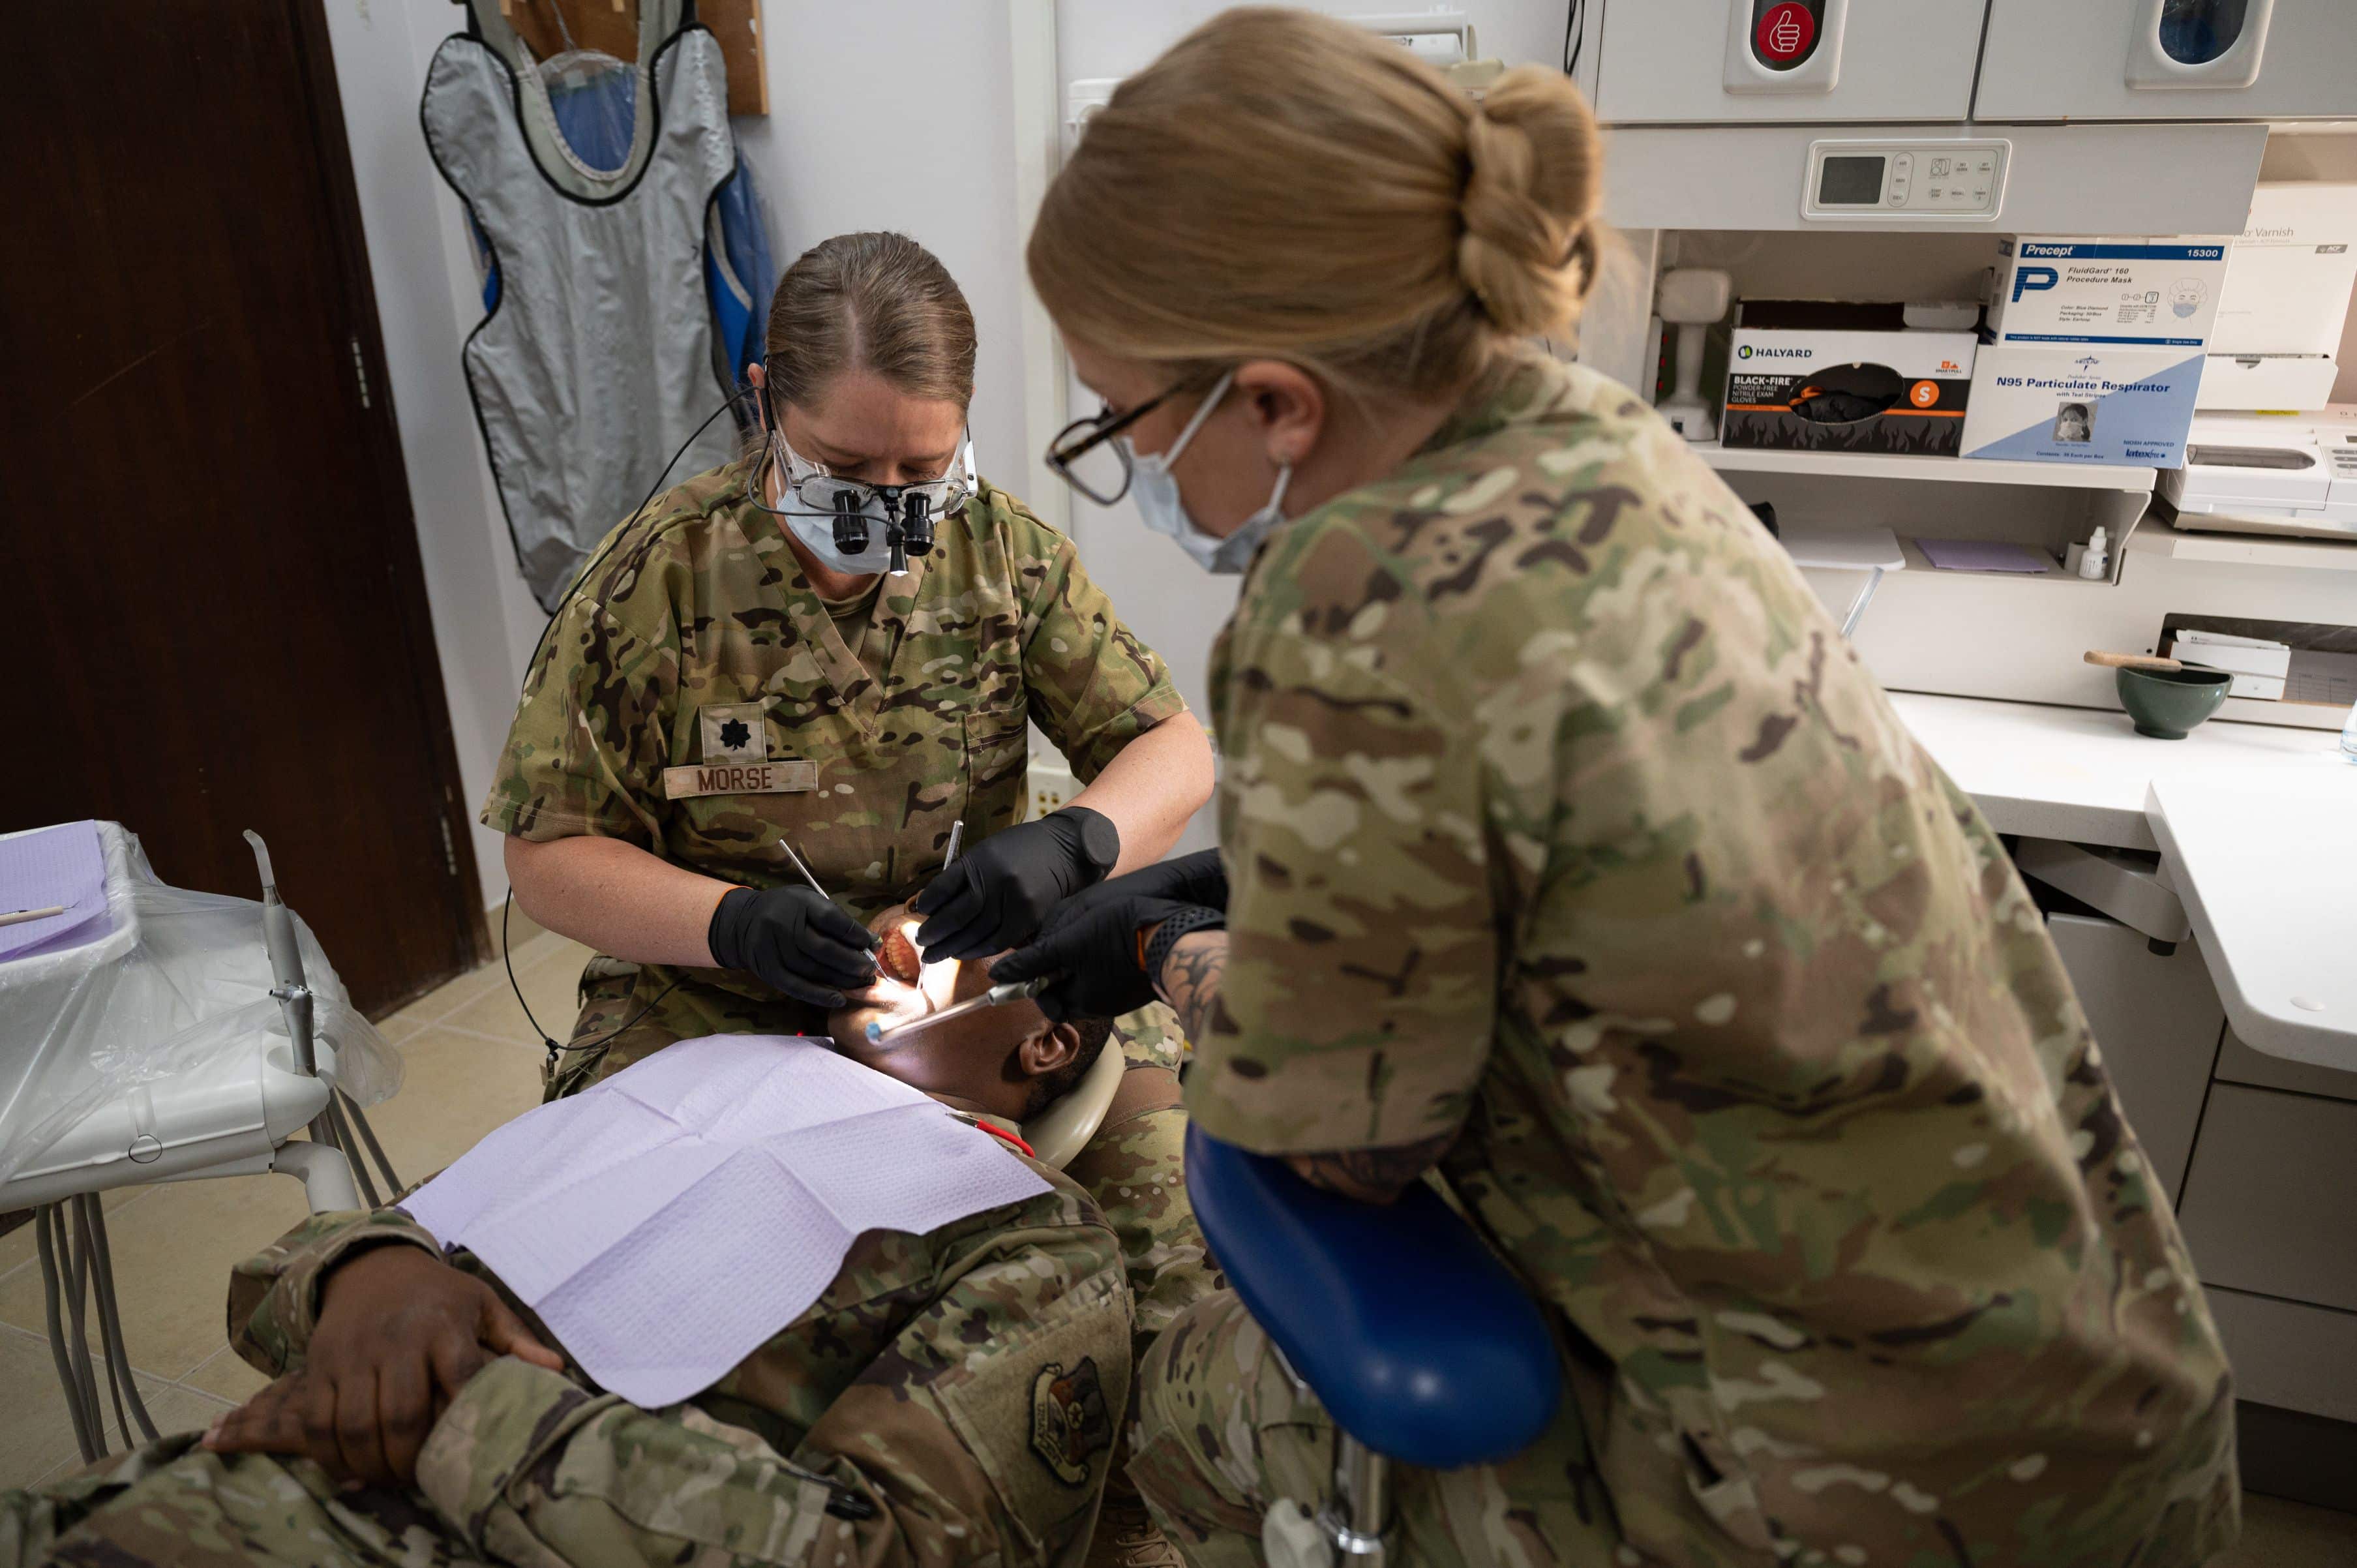 U.S. Air Force Lt. Col. Paula Morse, chief of dental services, 386th Expeditionary Medical Group, performs a dental examination on Capt. Koech C. Bellion, public health officer, 386th EMDG, while Tech. Sgt. Shannon Raaymakers, noncommissioned officer in charge of dental services, 386th EMDG